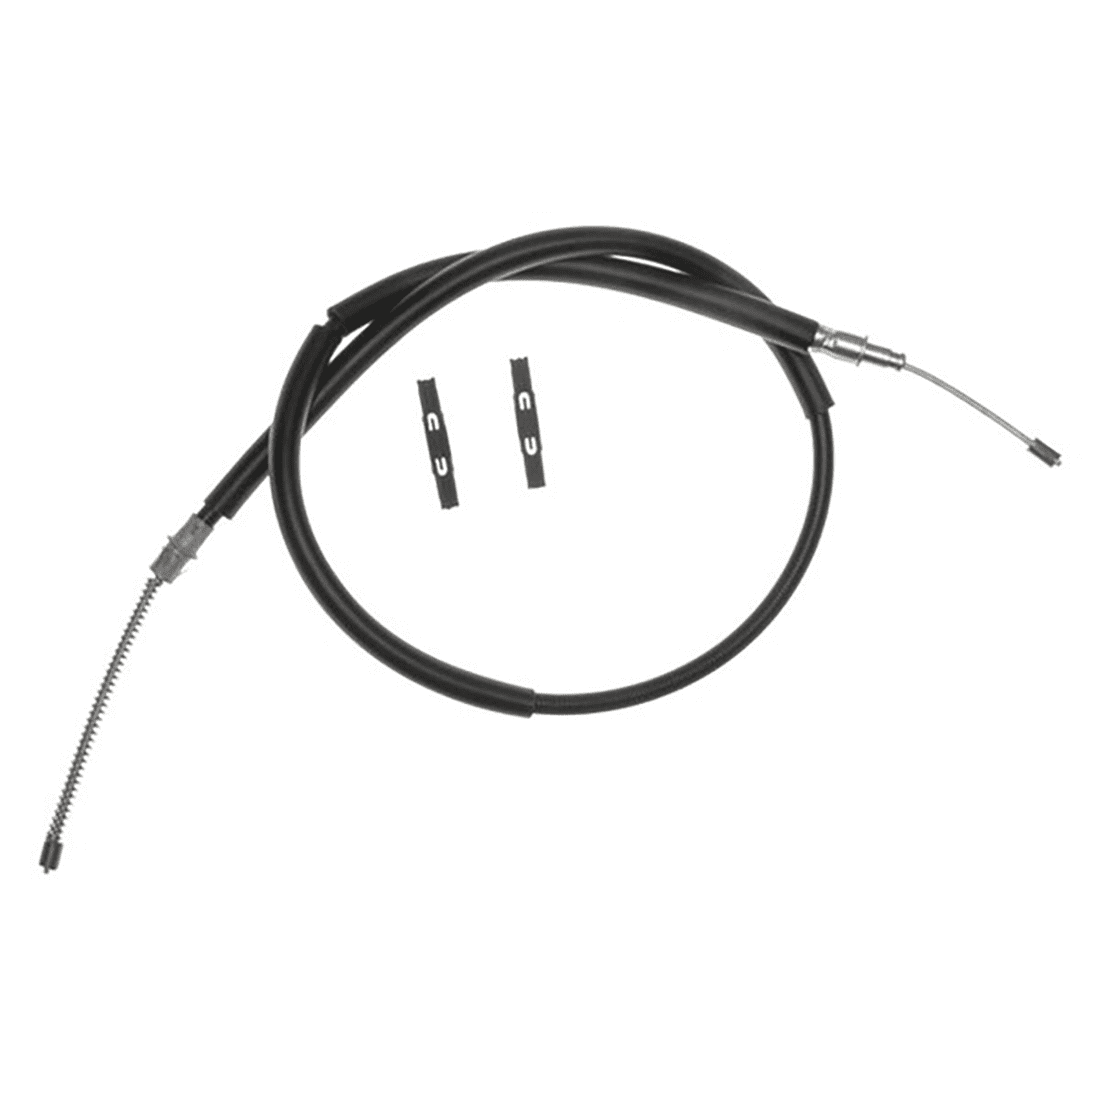 Fits Ford Ranger 2 X Raybestos Brakes Rear Left Rear Right Parking Brake Cable